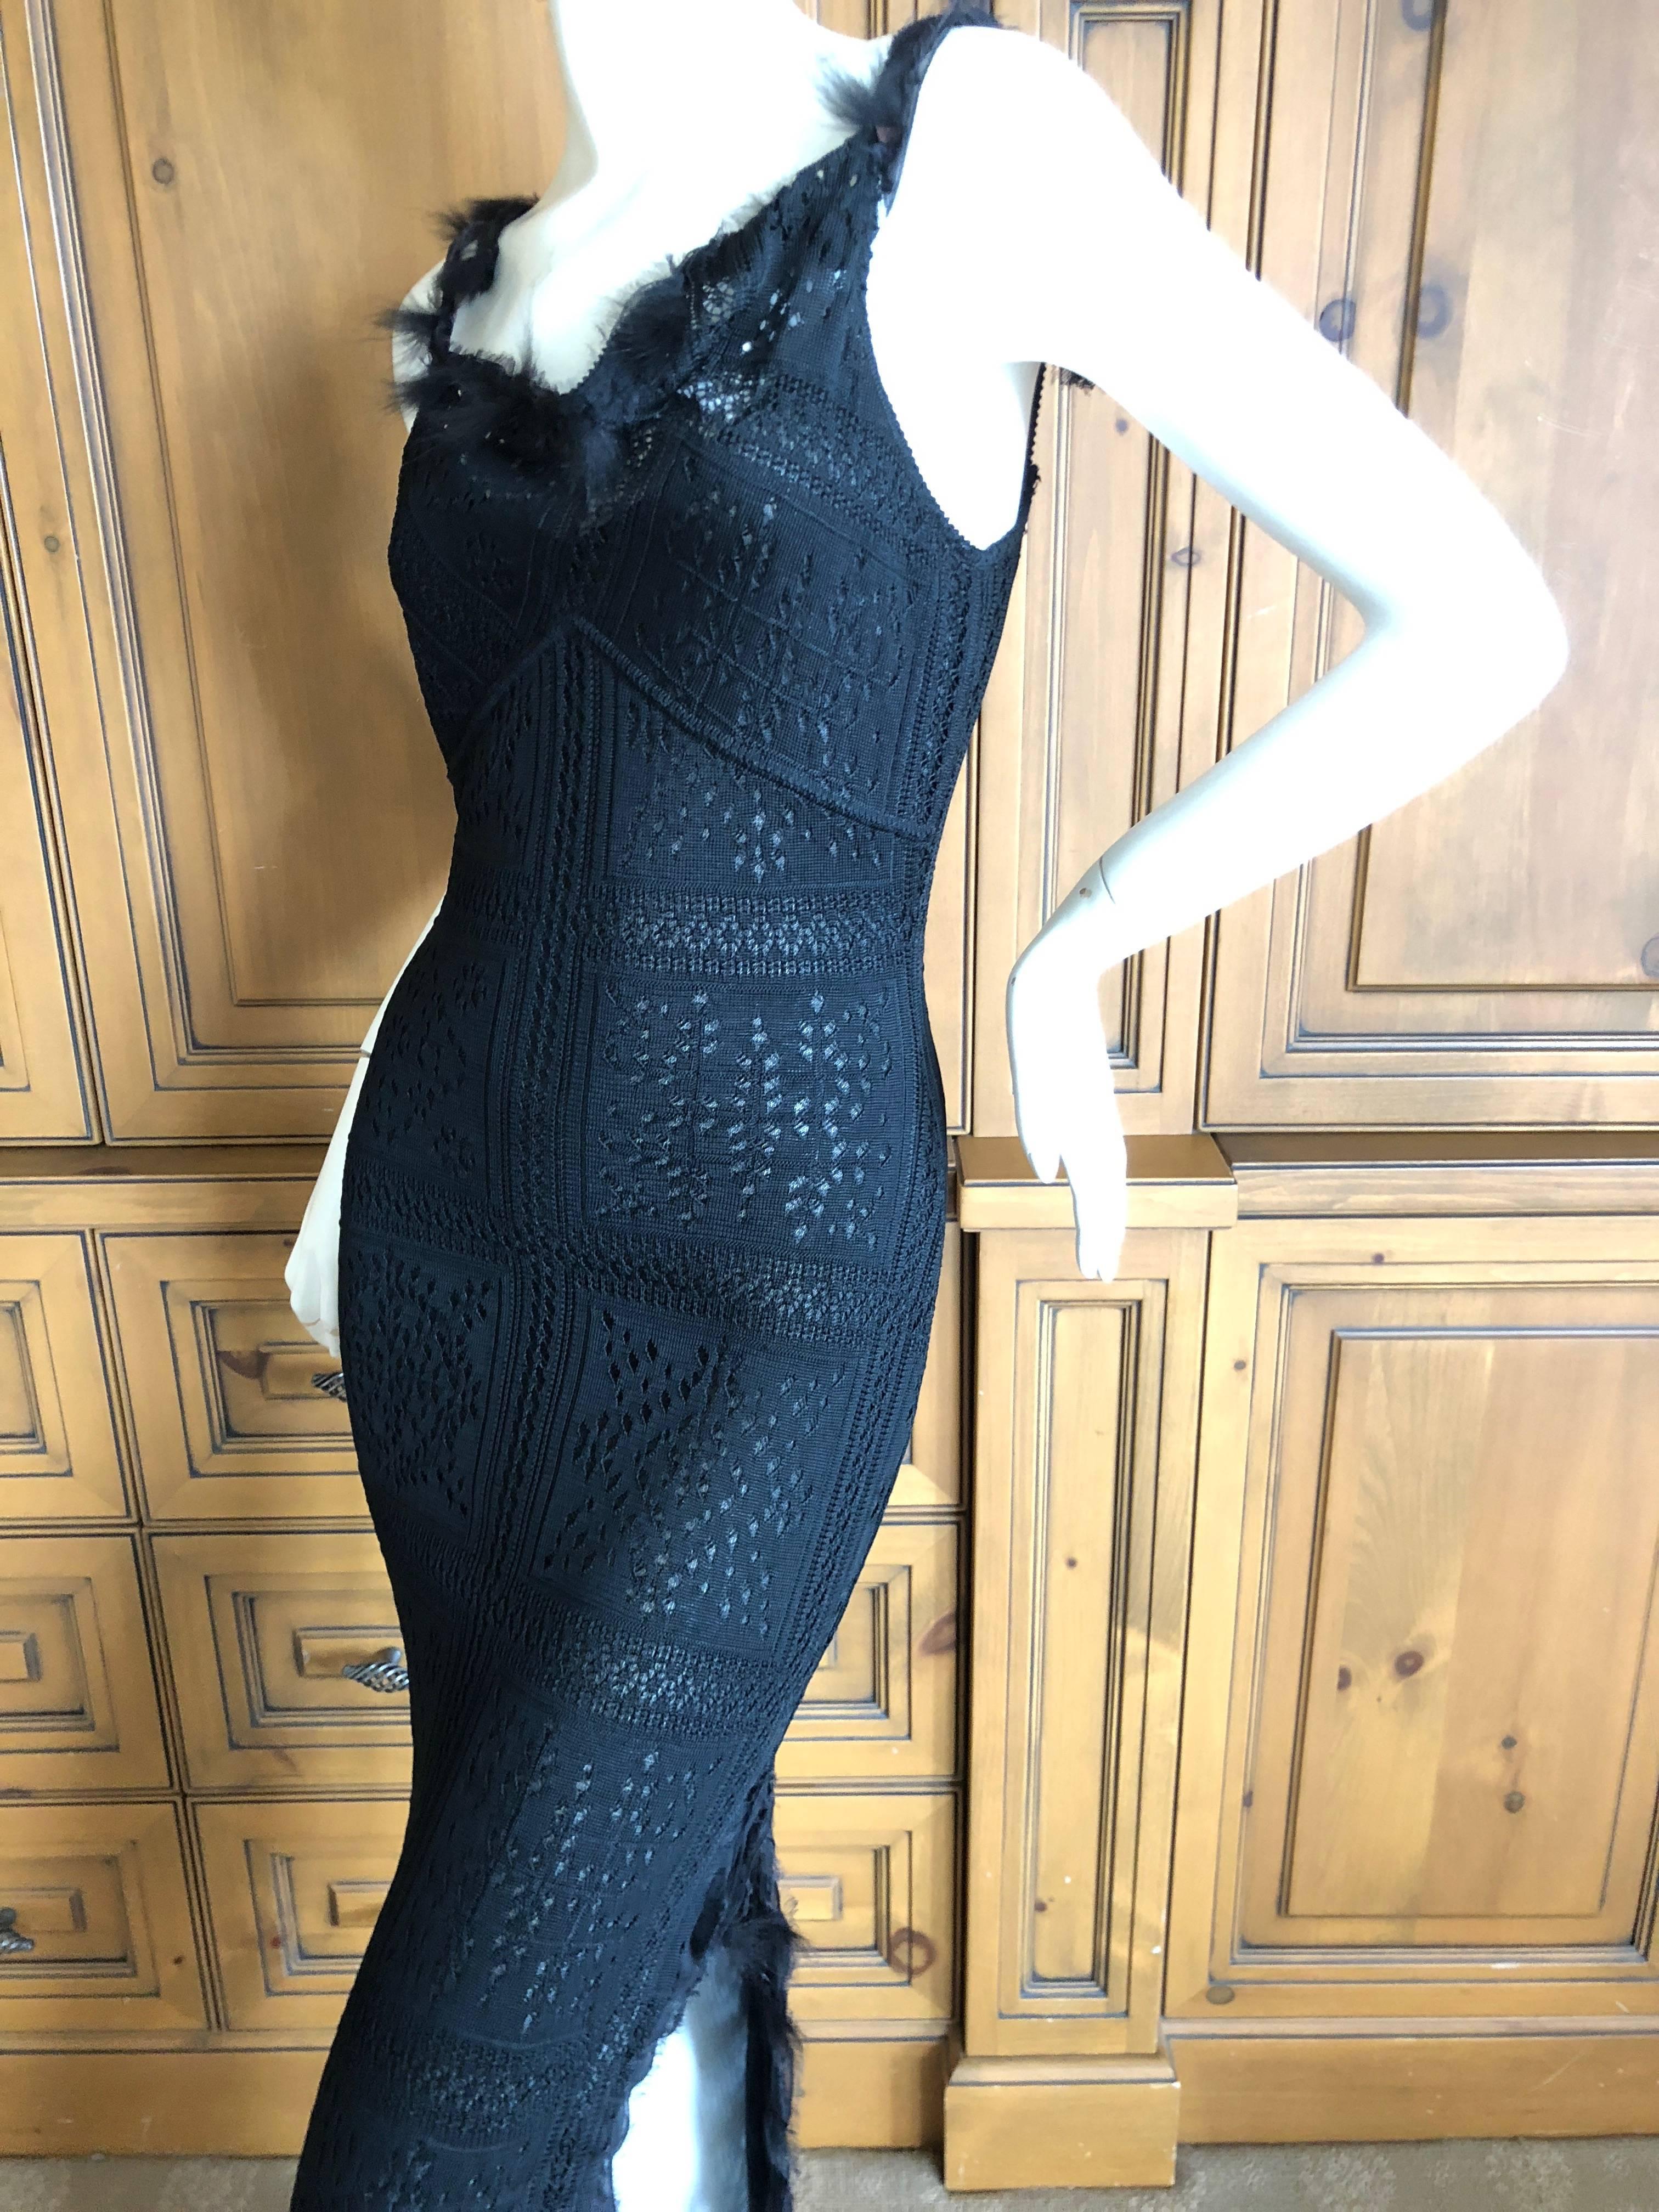 John Galliano 1990's Label Sheer Black Knit Feather Trim Dress with High Slit.
So much prettier in person.
Size M
Bust 36